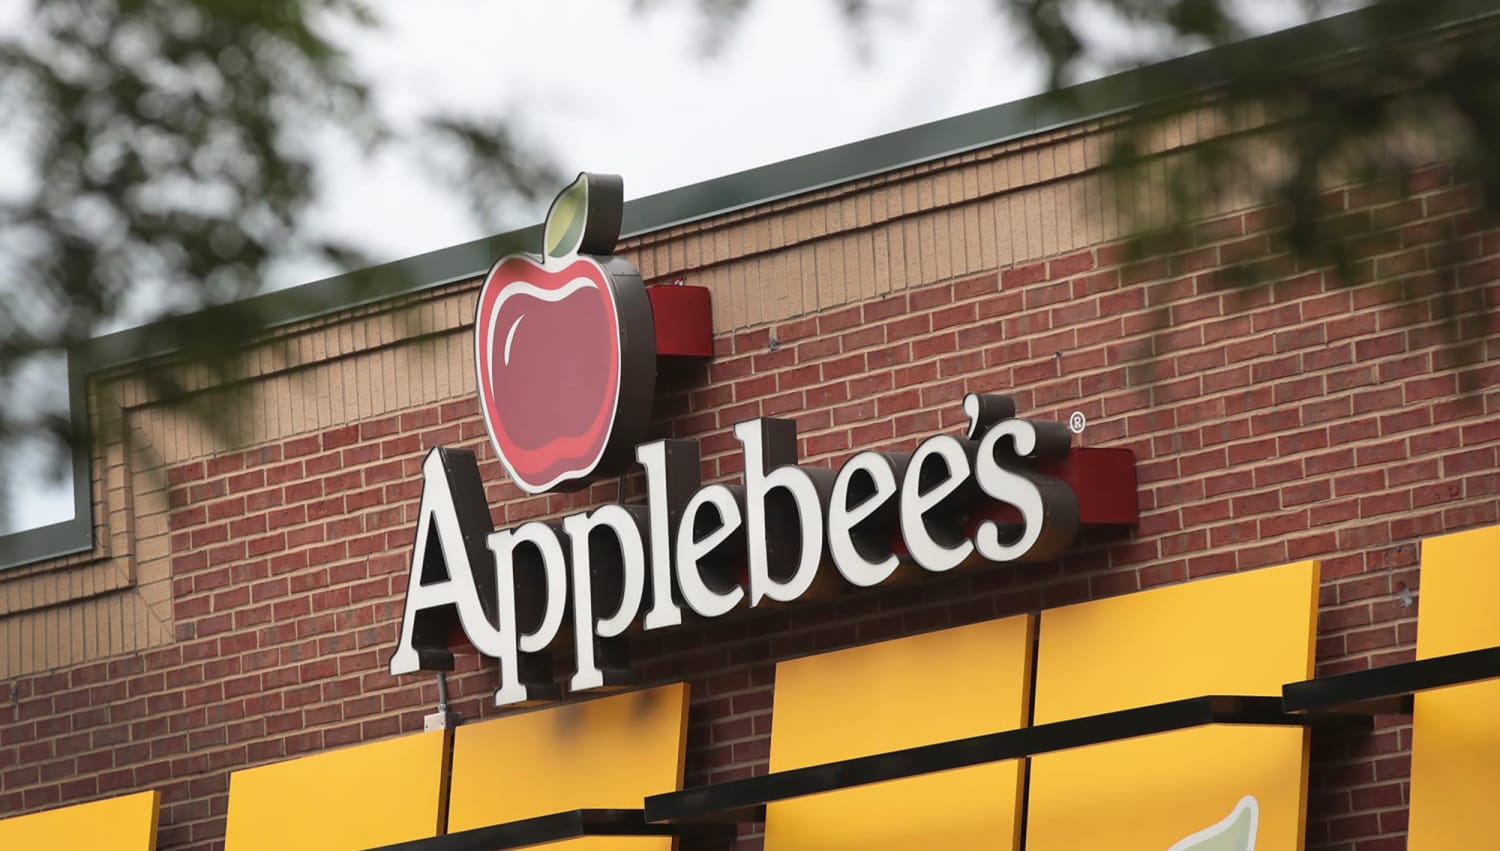 Applebee’s is giving away free wings this week. Here’s how to get yours